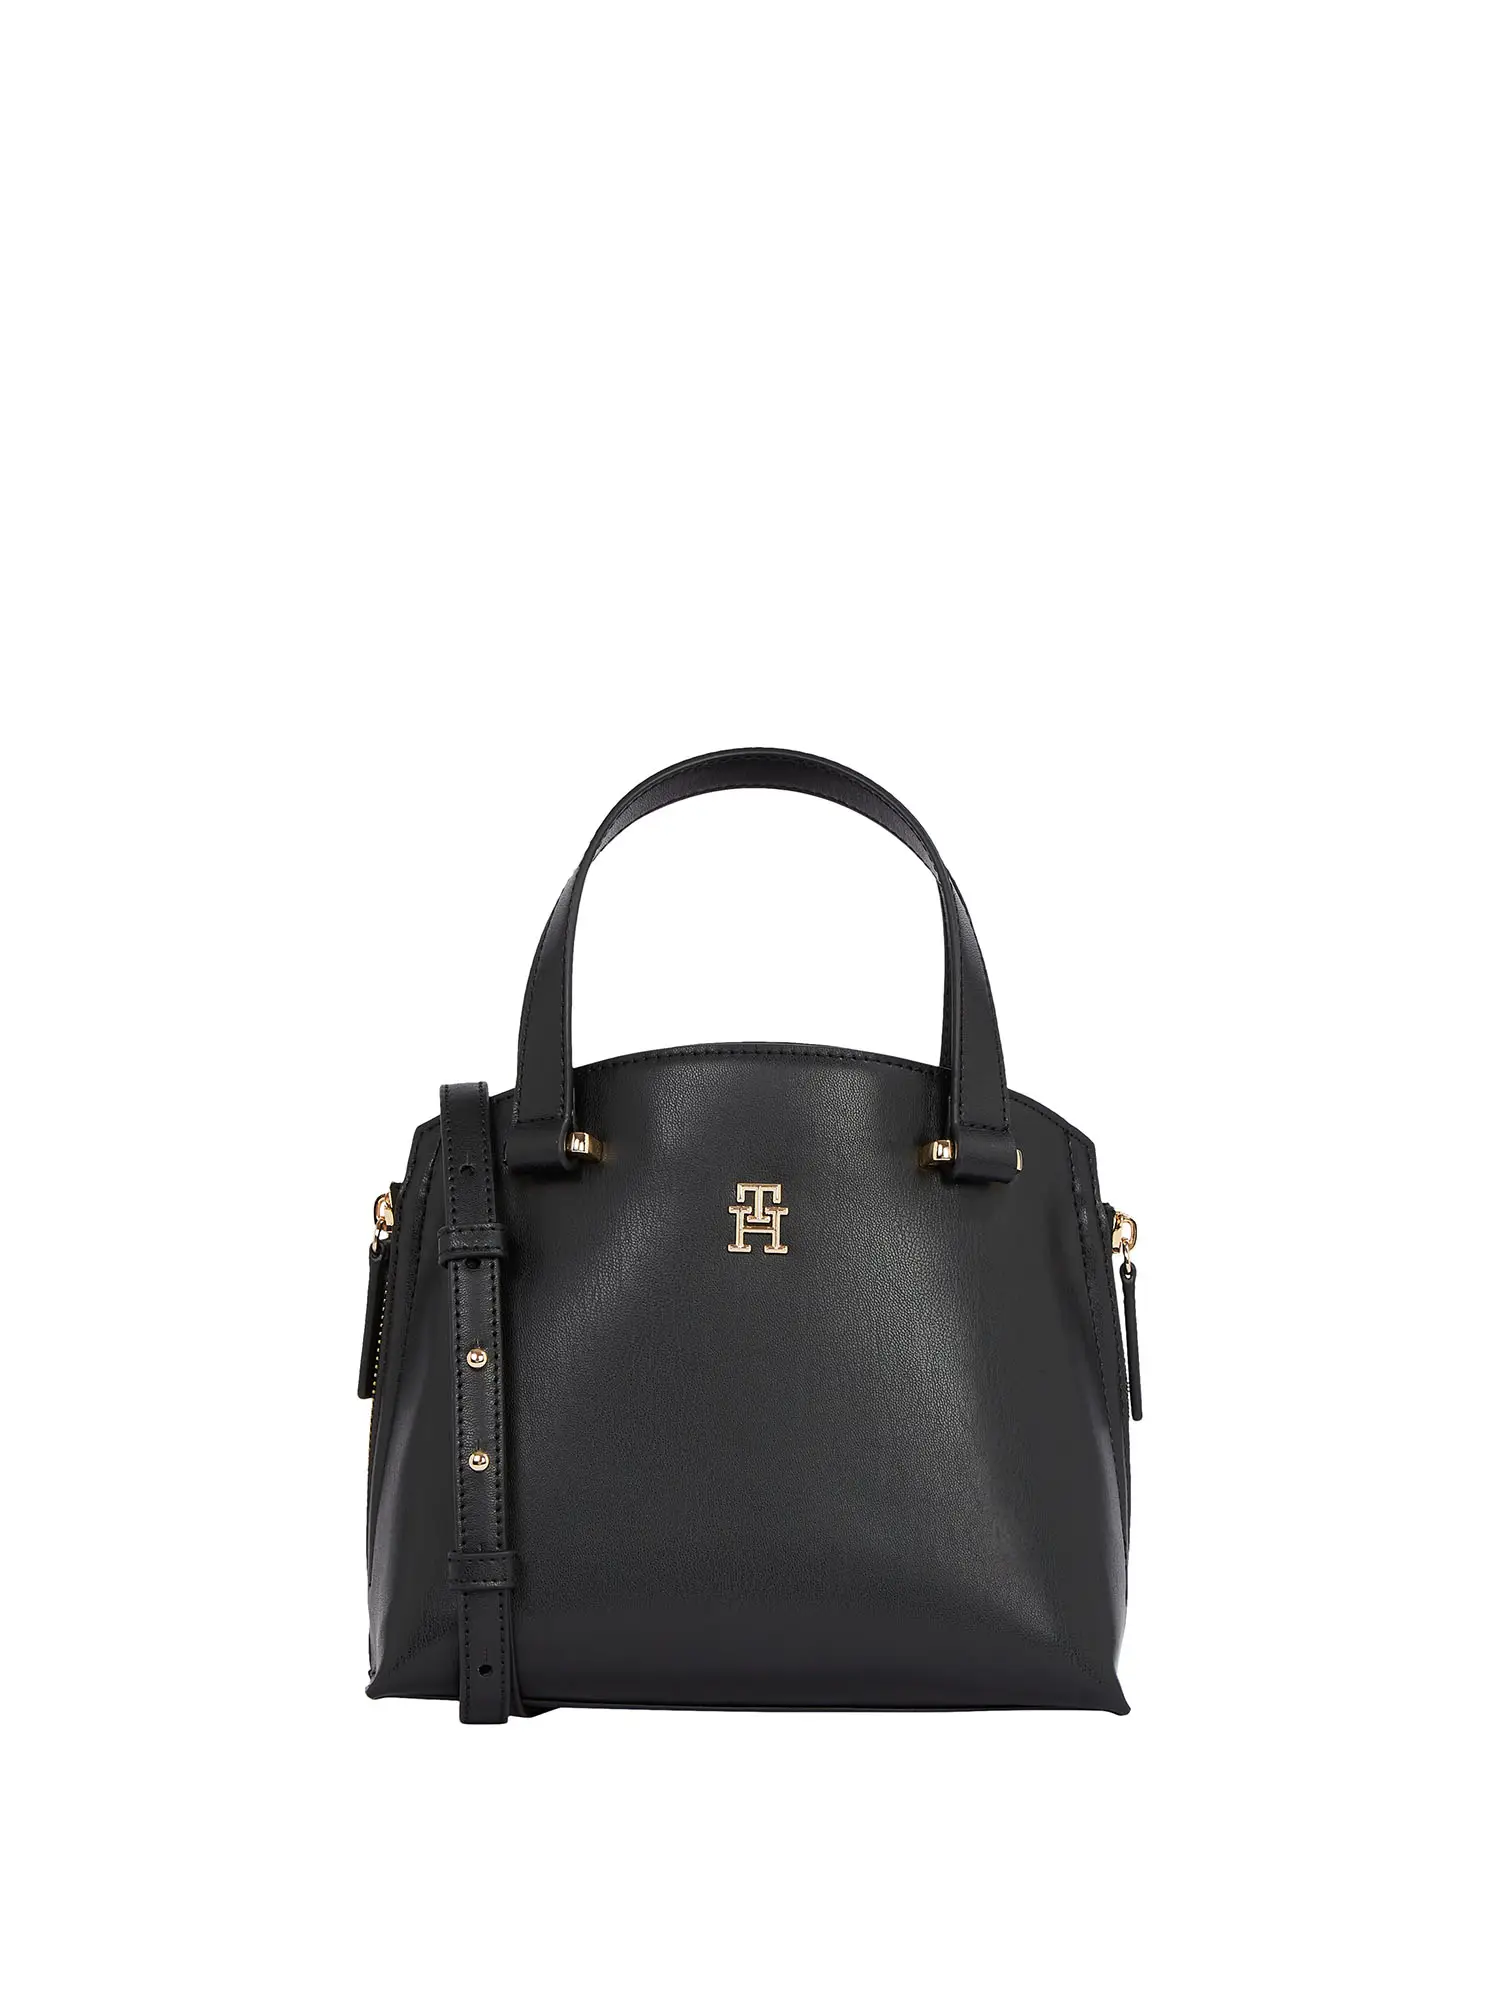 TOTE DONNA - TOMMY HILFIGER - AW0AW15968 - NERO, UNICA